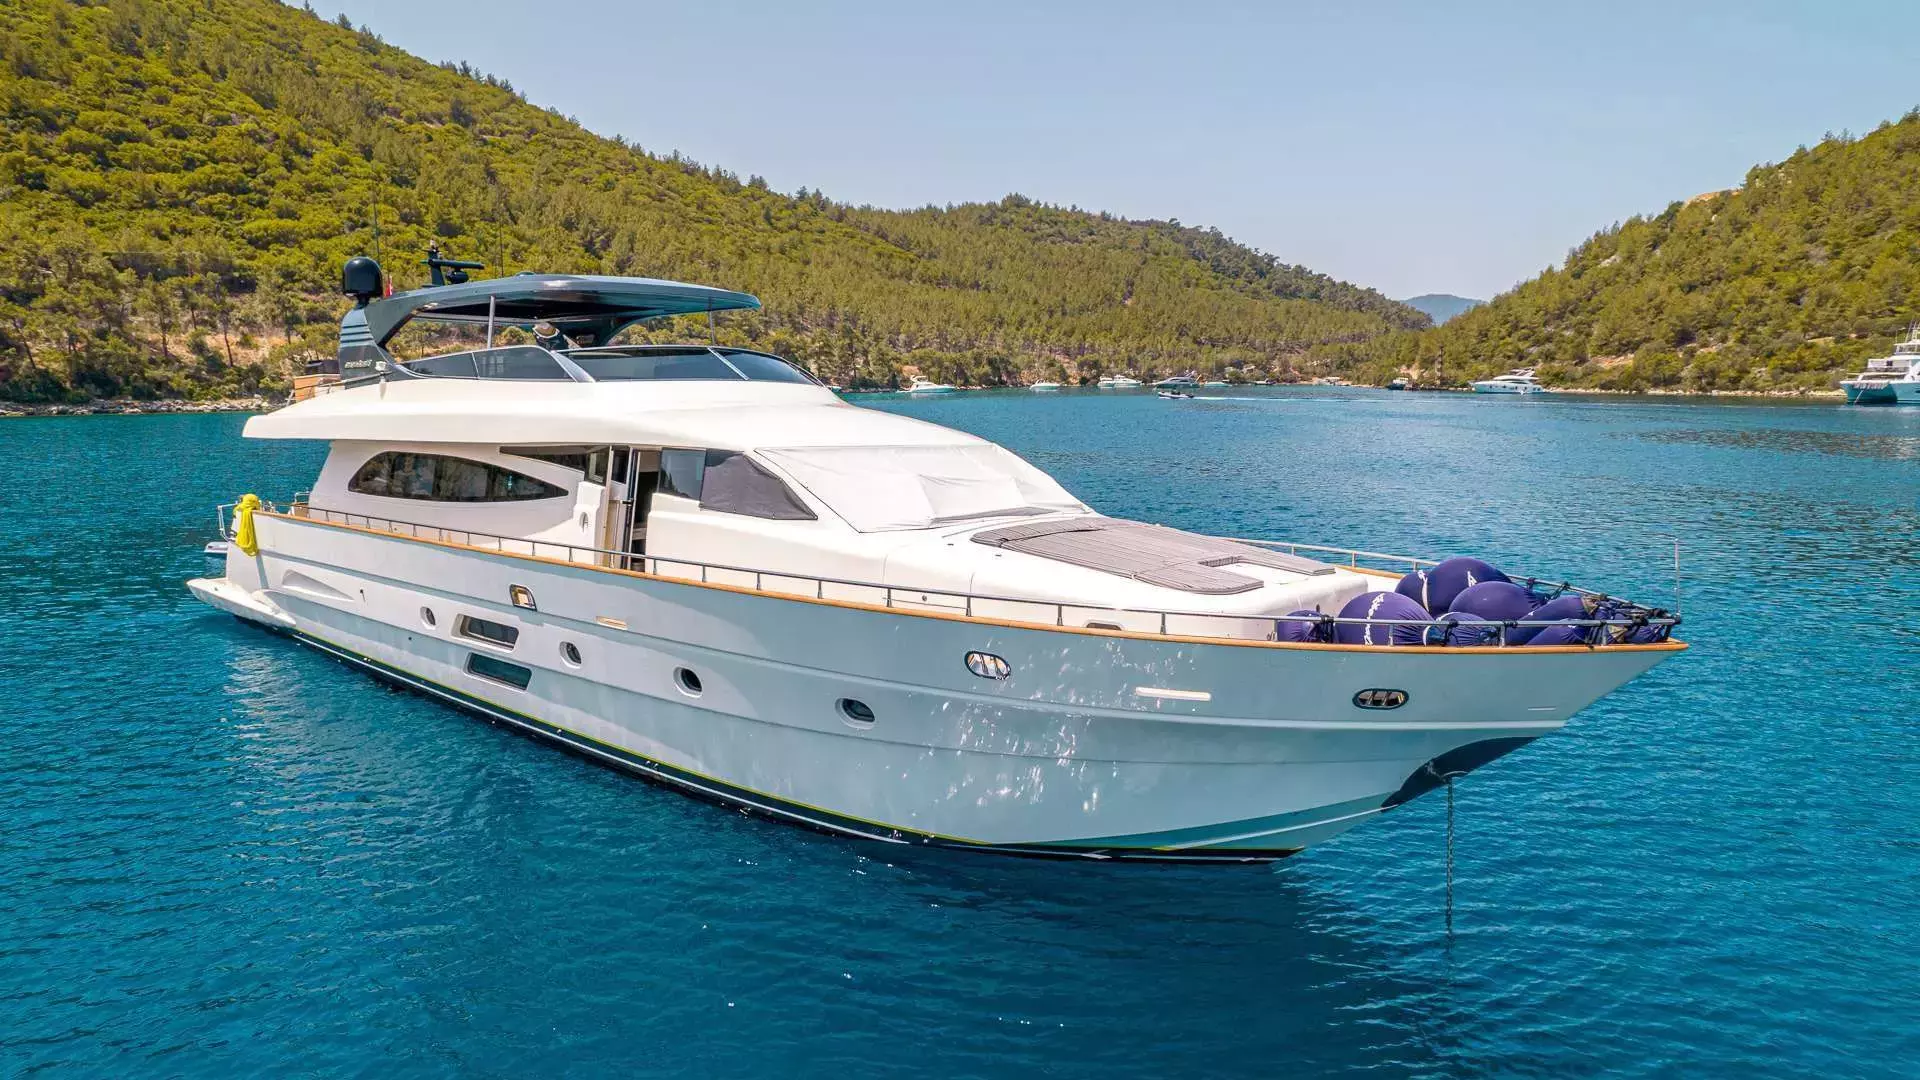 Liberata by Canados - Top rates for a Charter of a private Motor Yacht in Greece